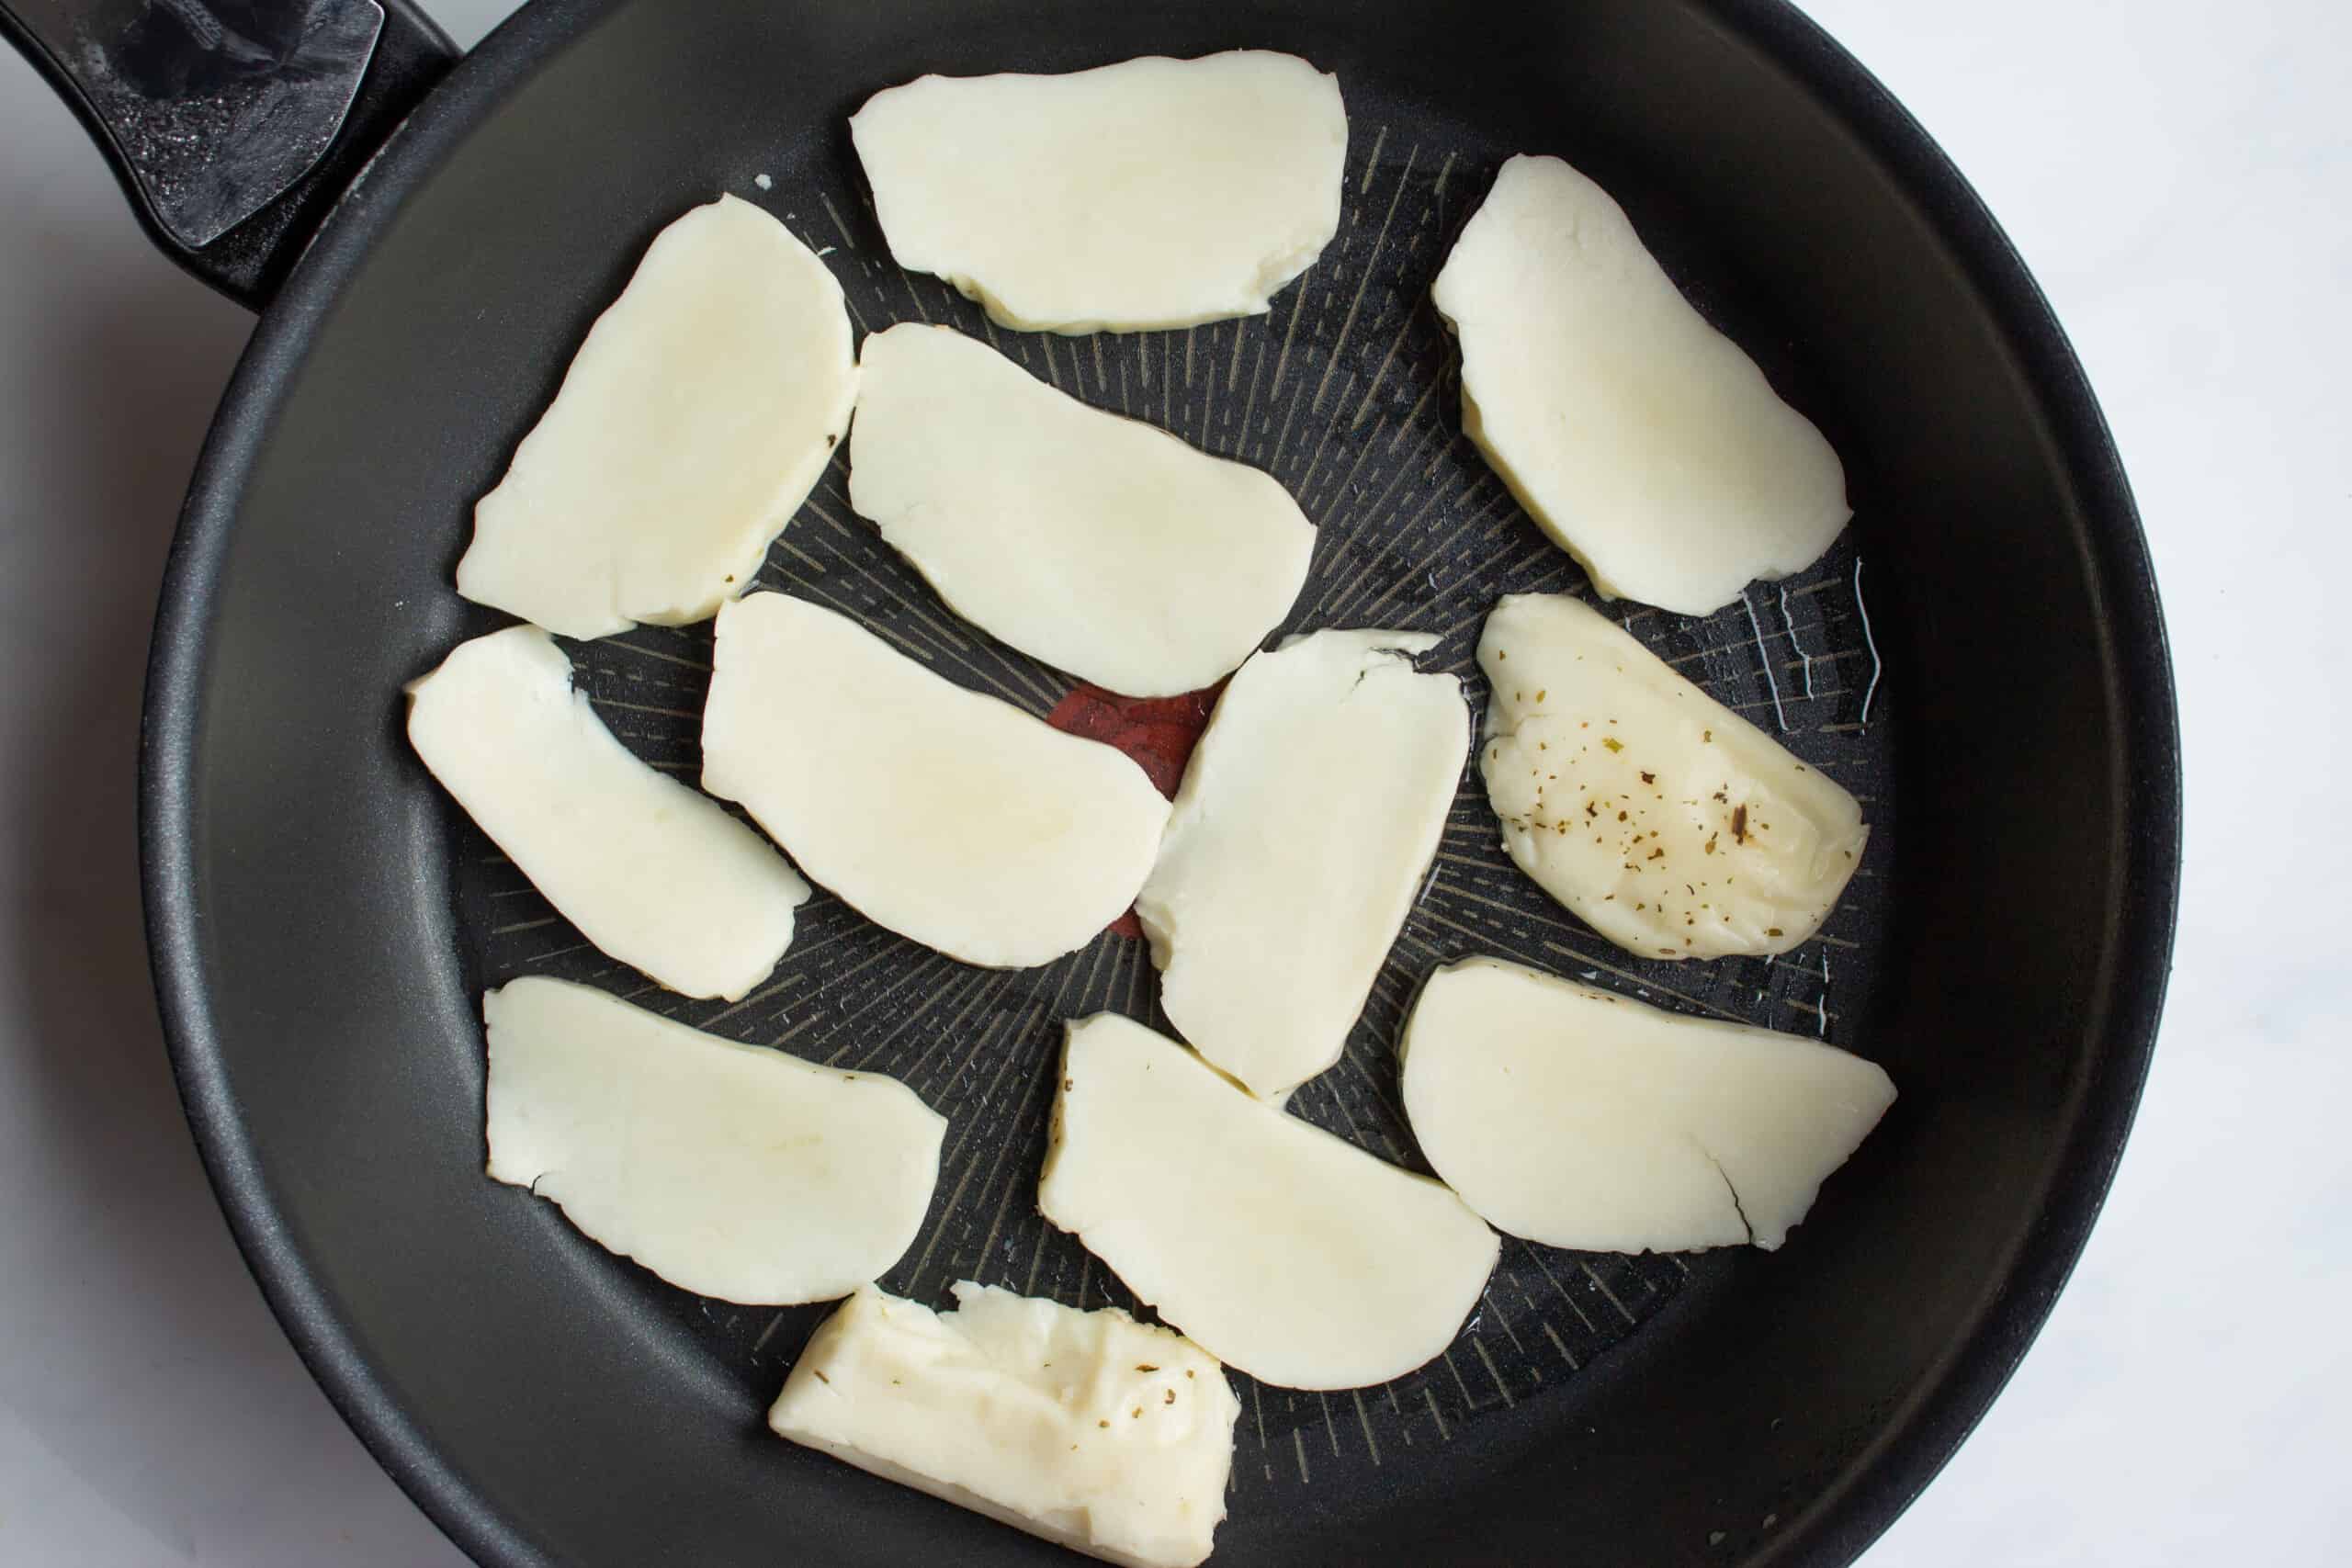 Thinly sliced halloumi added to the frying pan